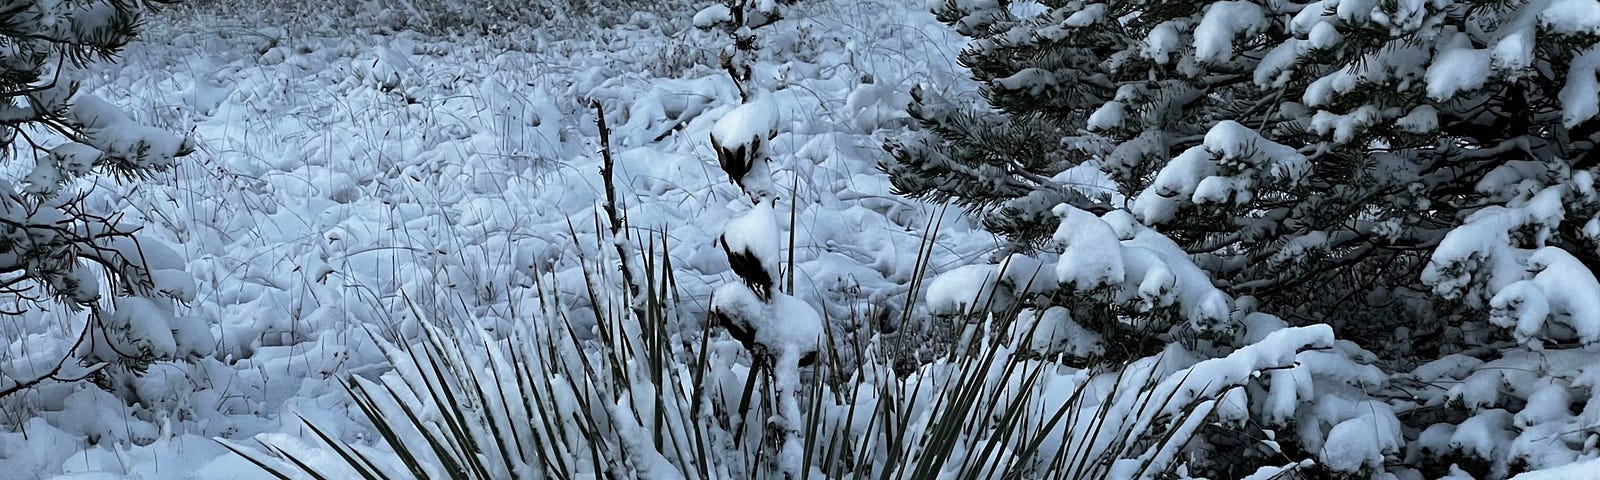 Low yucca plant with a fair amount of snow clinging to it. Snow covered trees and ground are visible in the background.